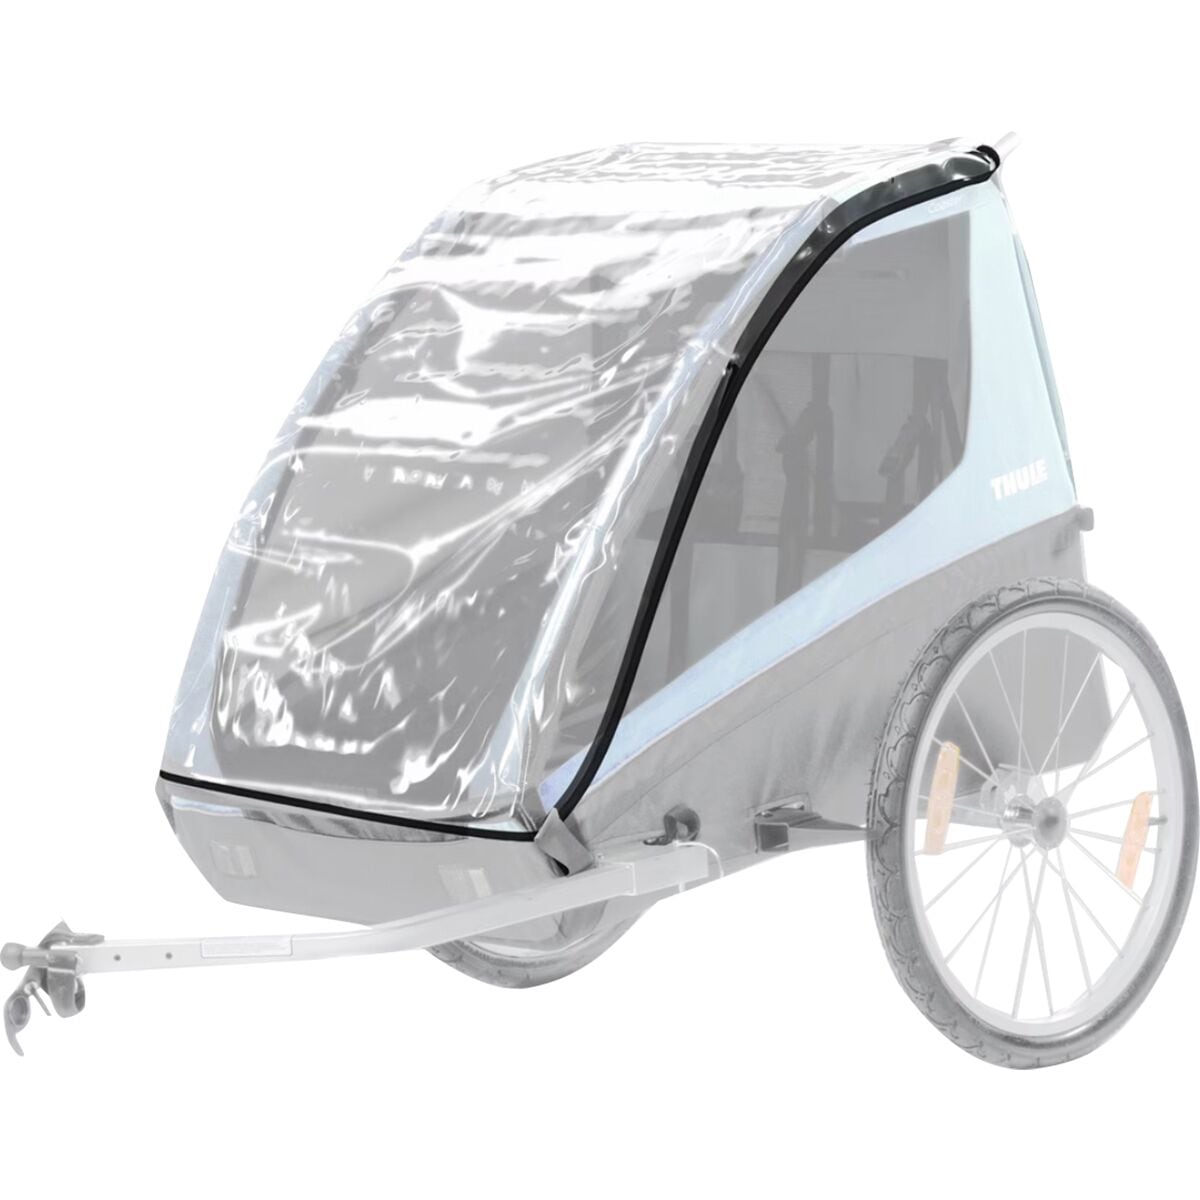 Thule Chariot Coaster XT and Cadence Rain Cover